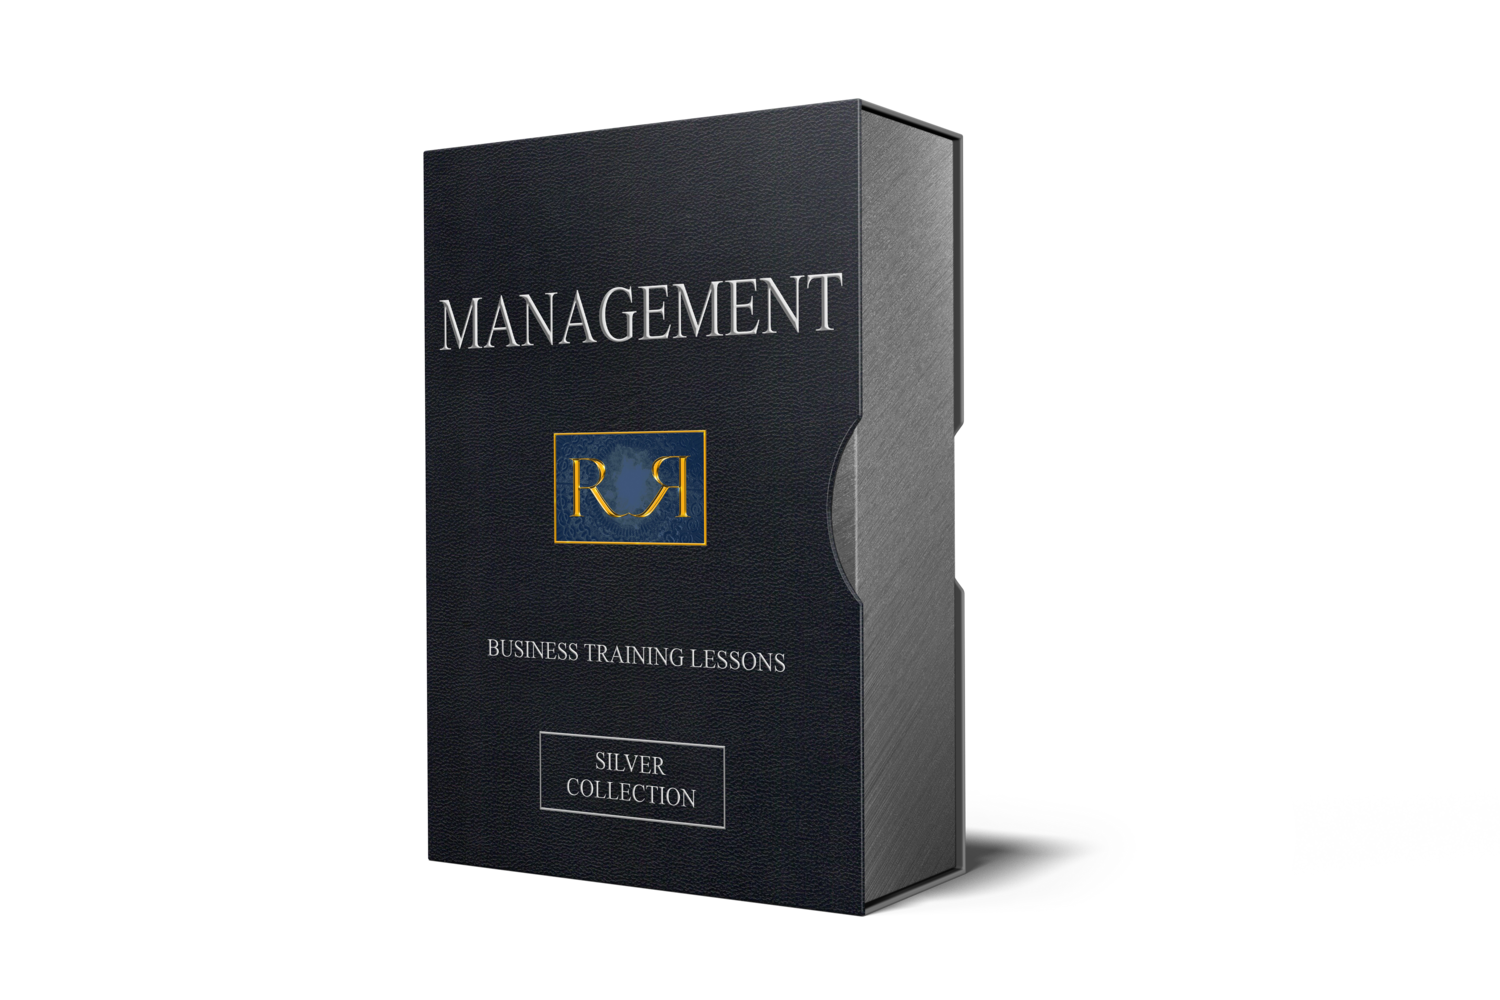 Management - Refined Reflections